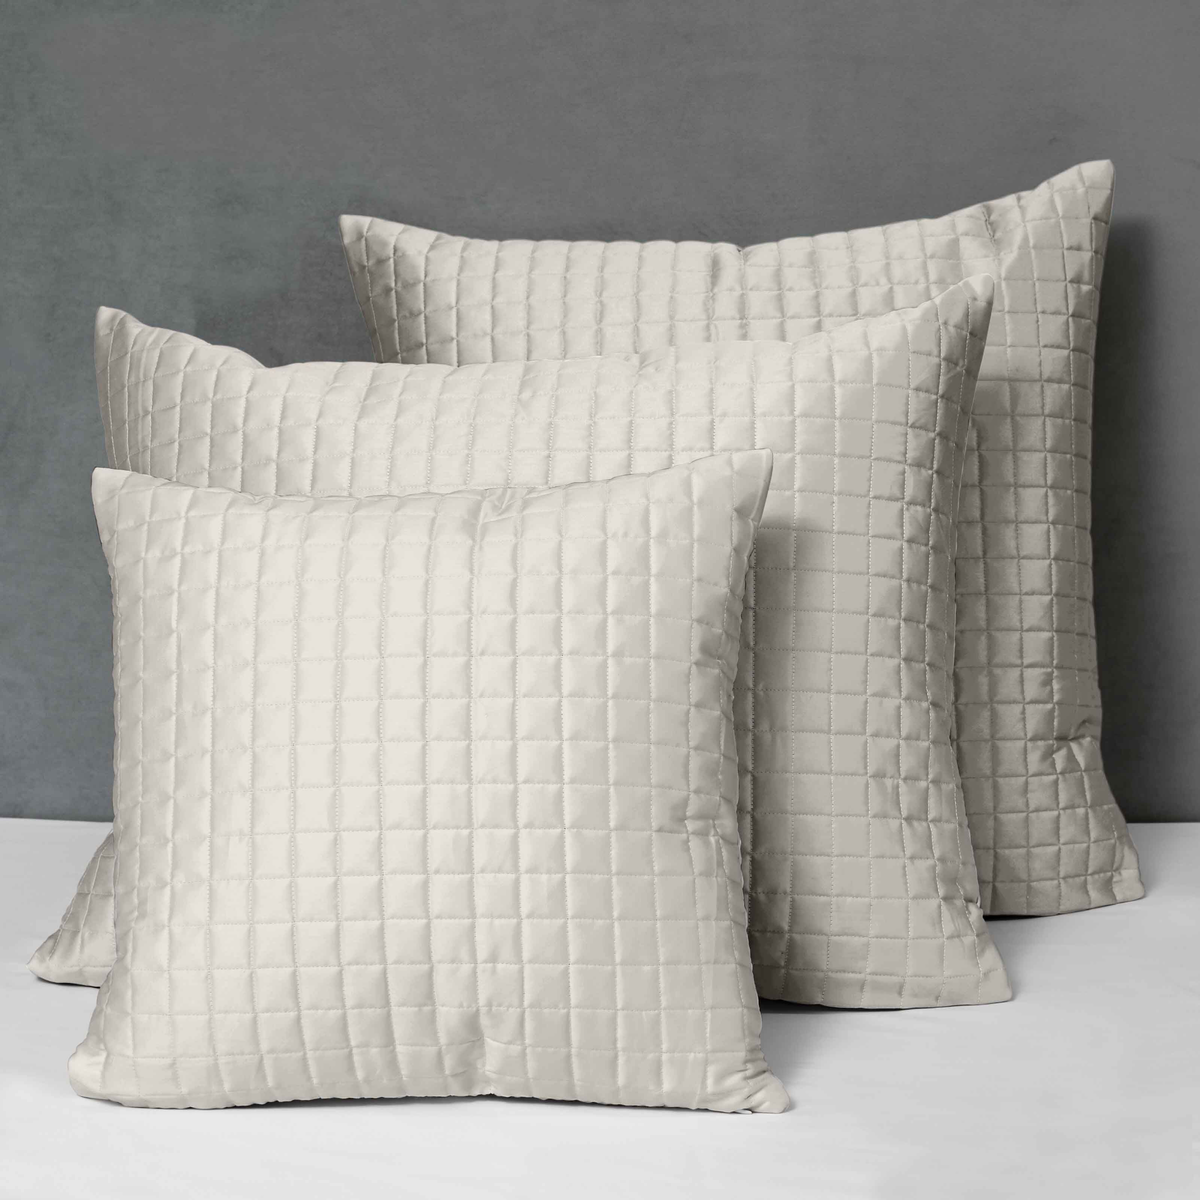 Different Sizes of Quilted Shams of Signoria Masaccio Bedding in Pearl Color